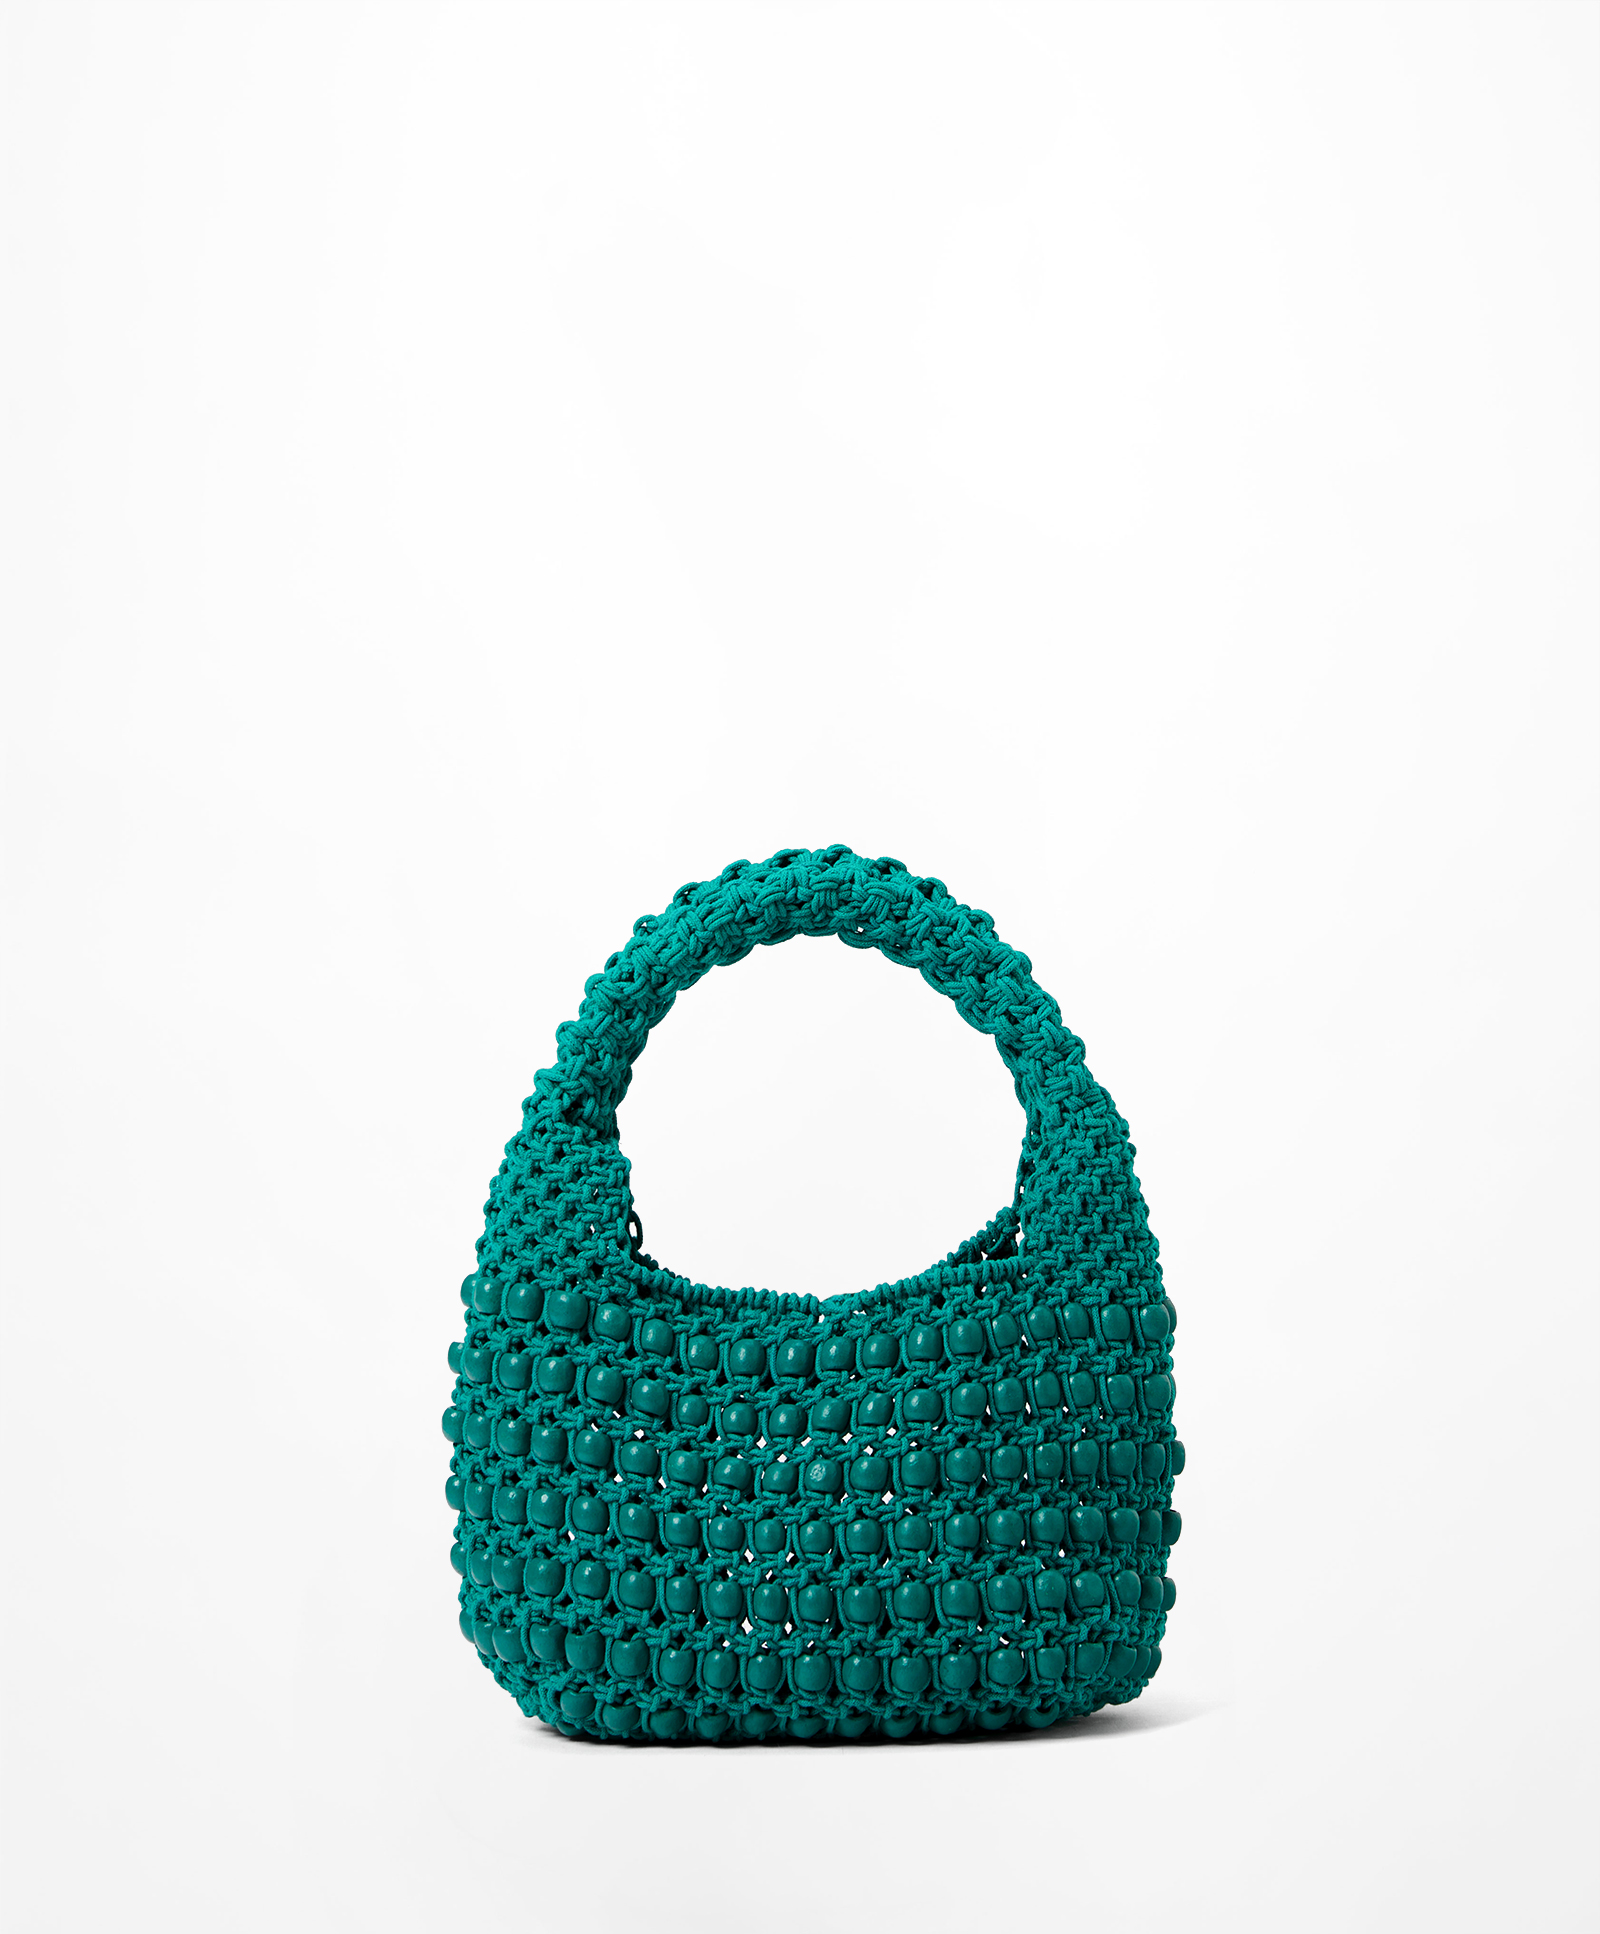 Handbag with strap and little ball details